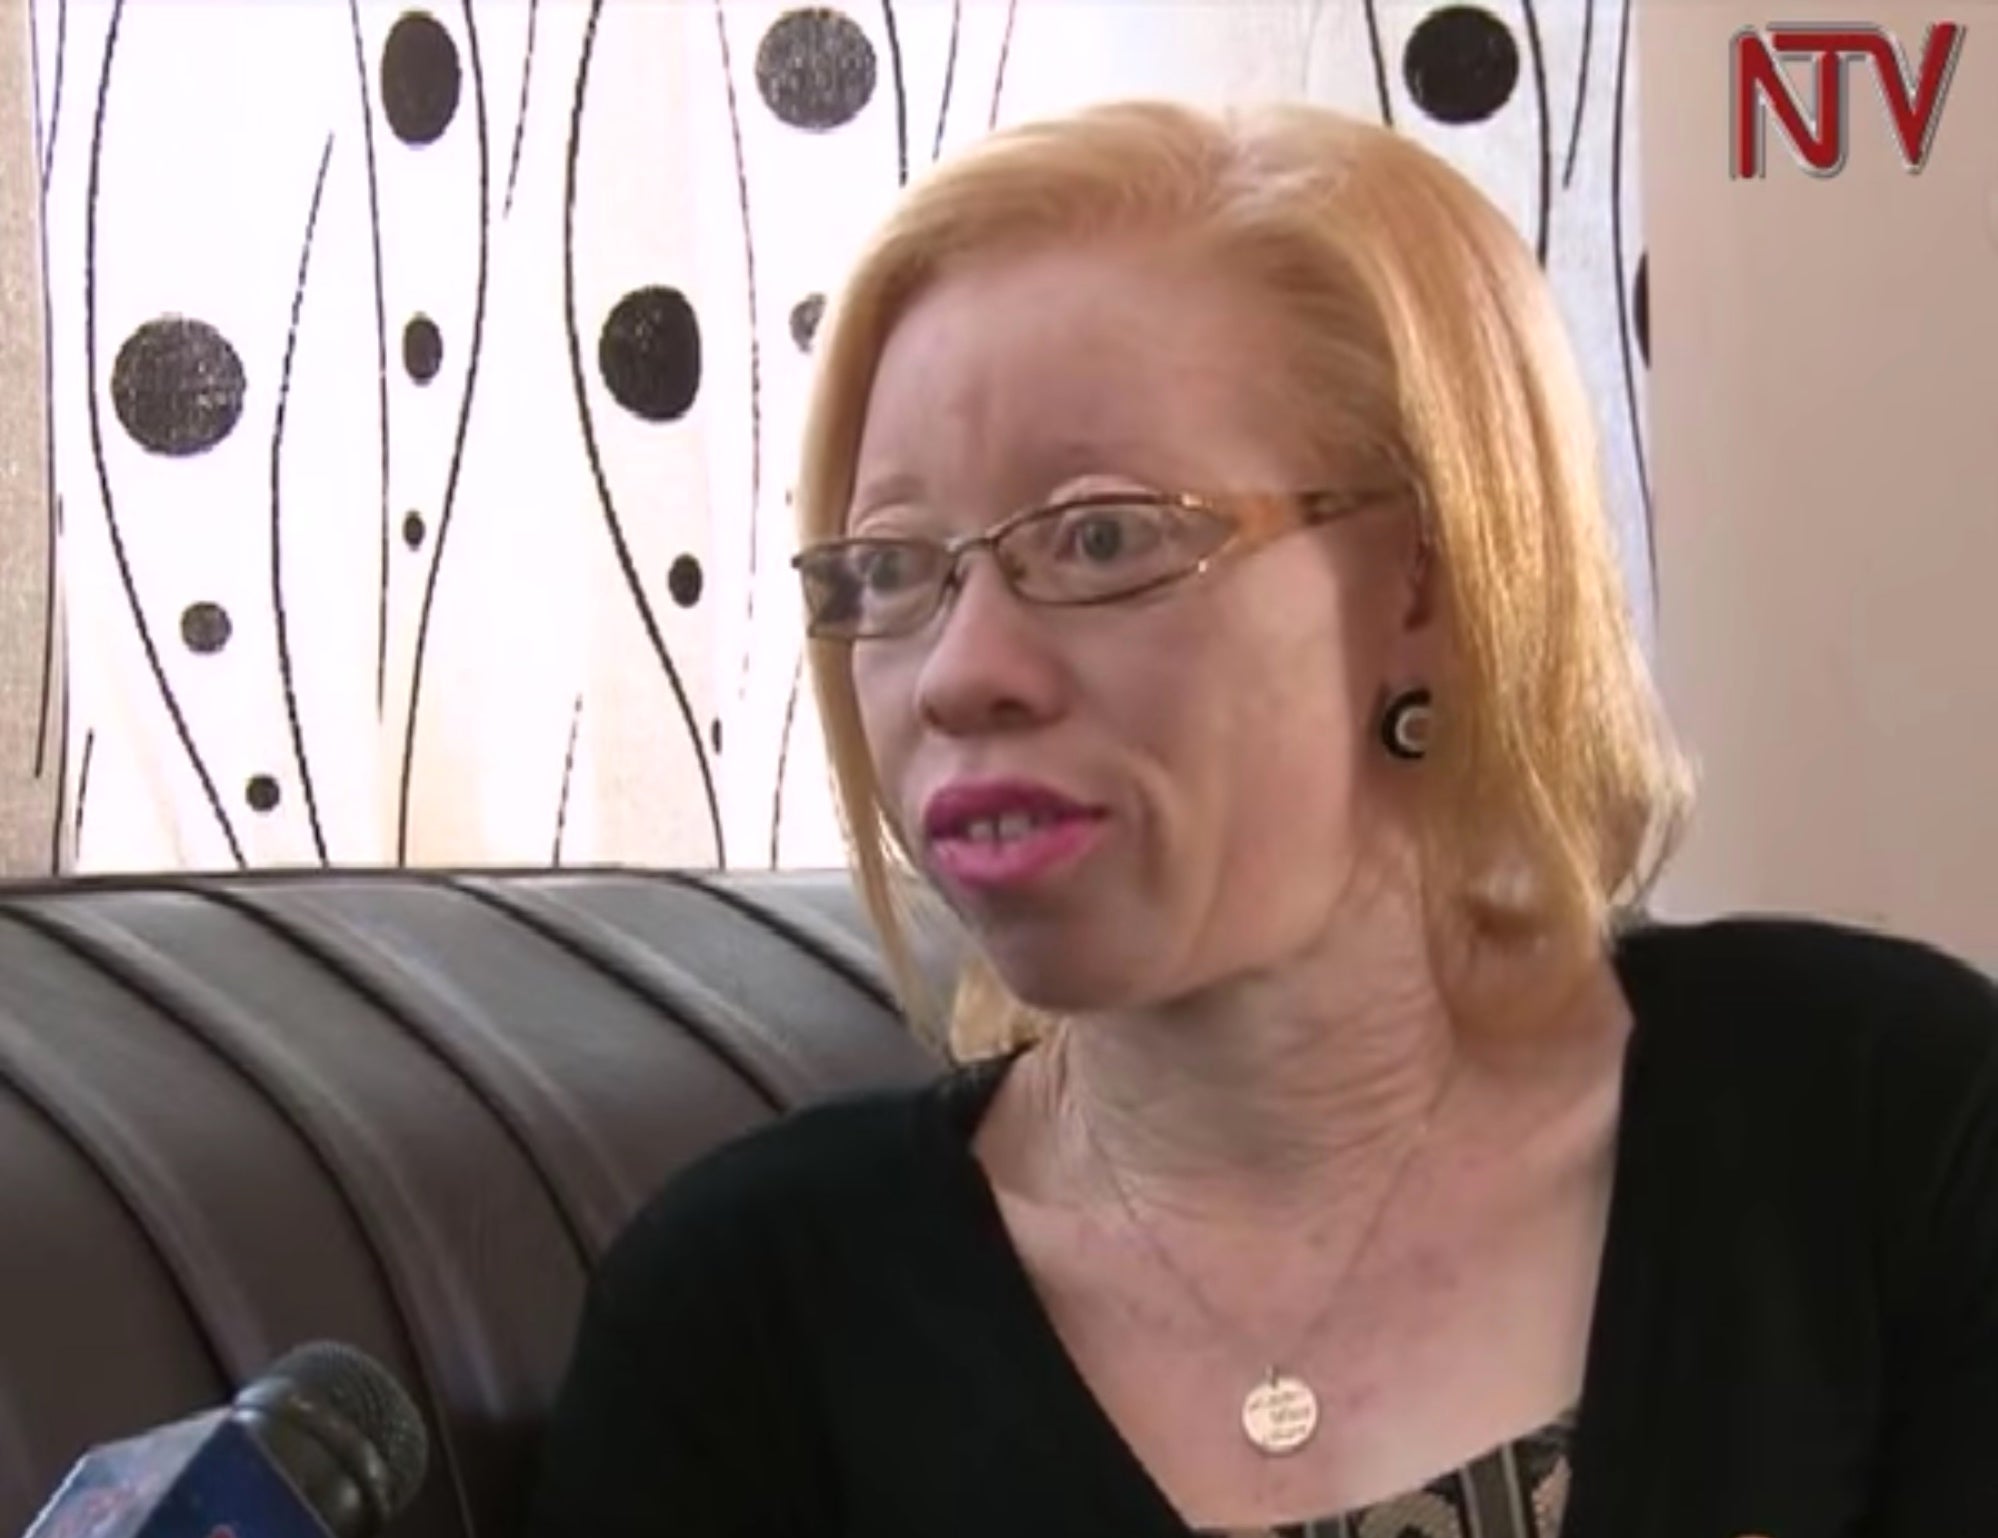 Olive Namutebi works to champion the rights of people with albinism, and has been interviewed in the past by NTV Uganda